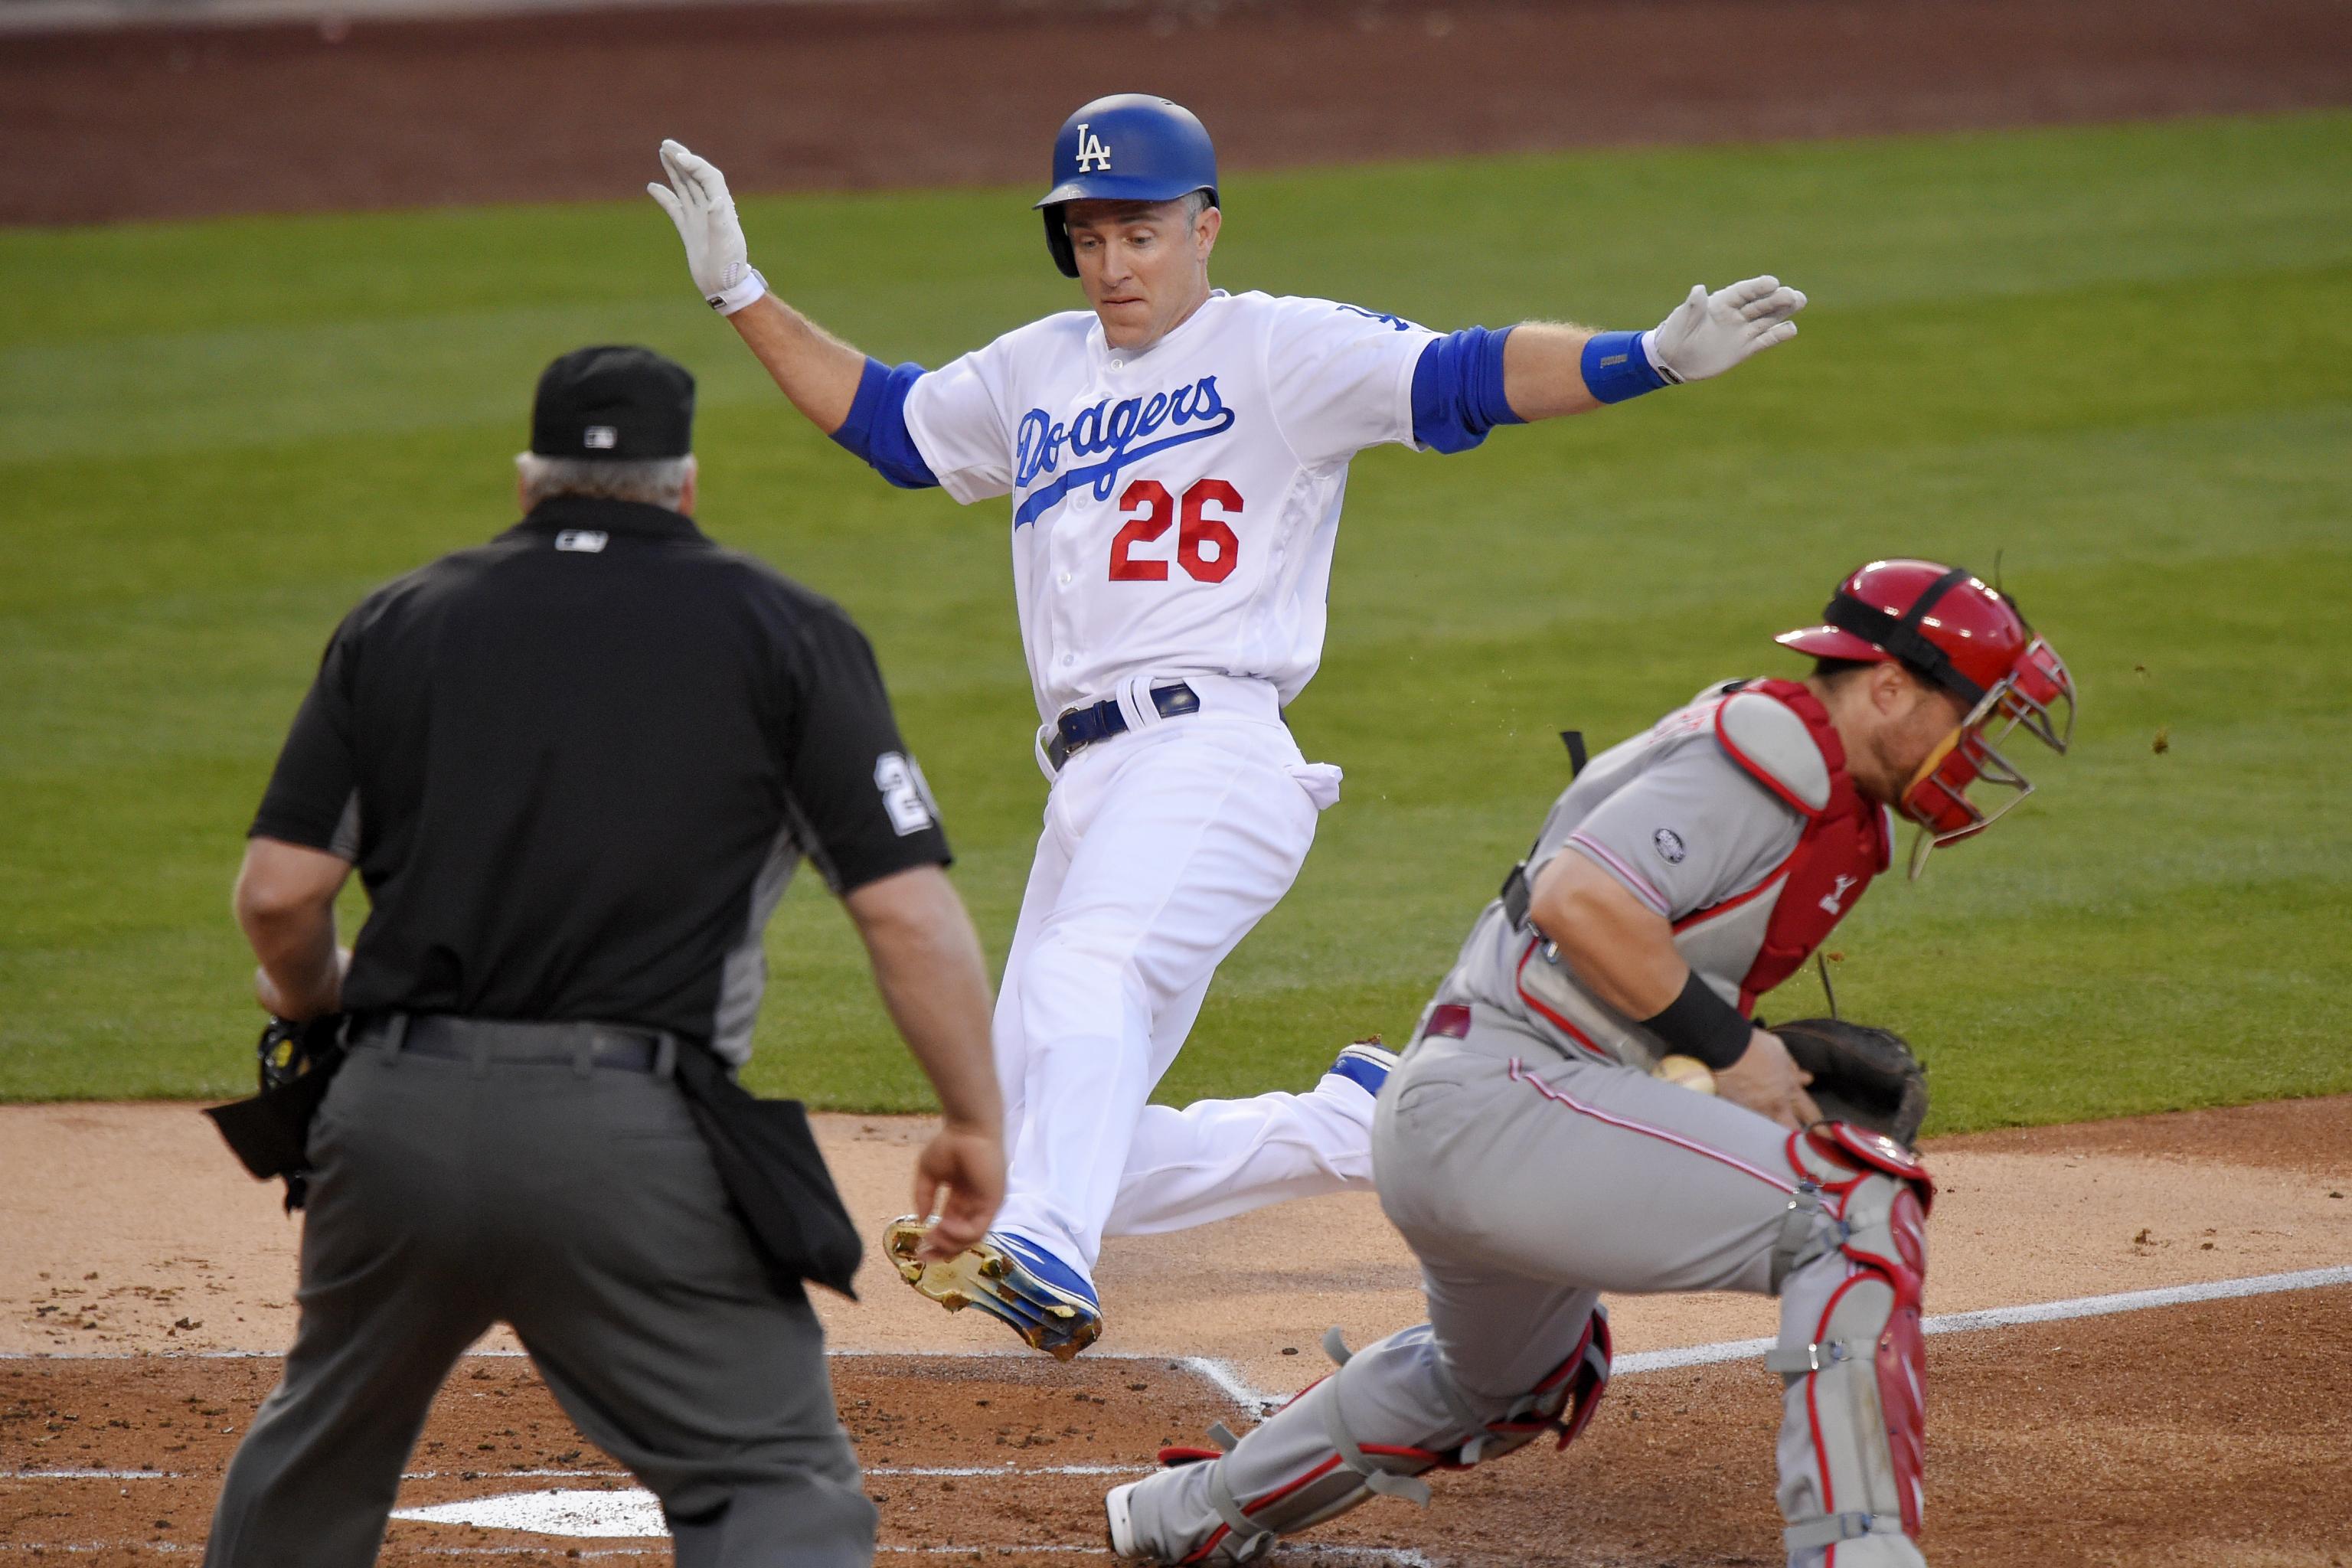 Chase Utley Re-Signs with Dodgers: Latest Contract Details